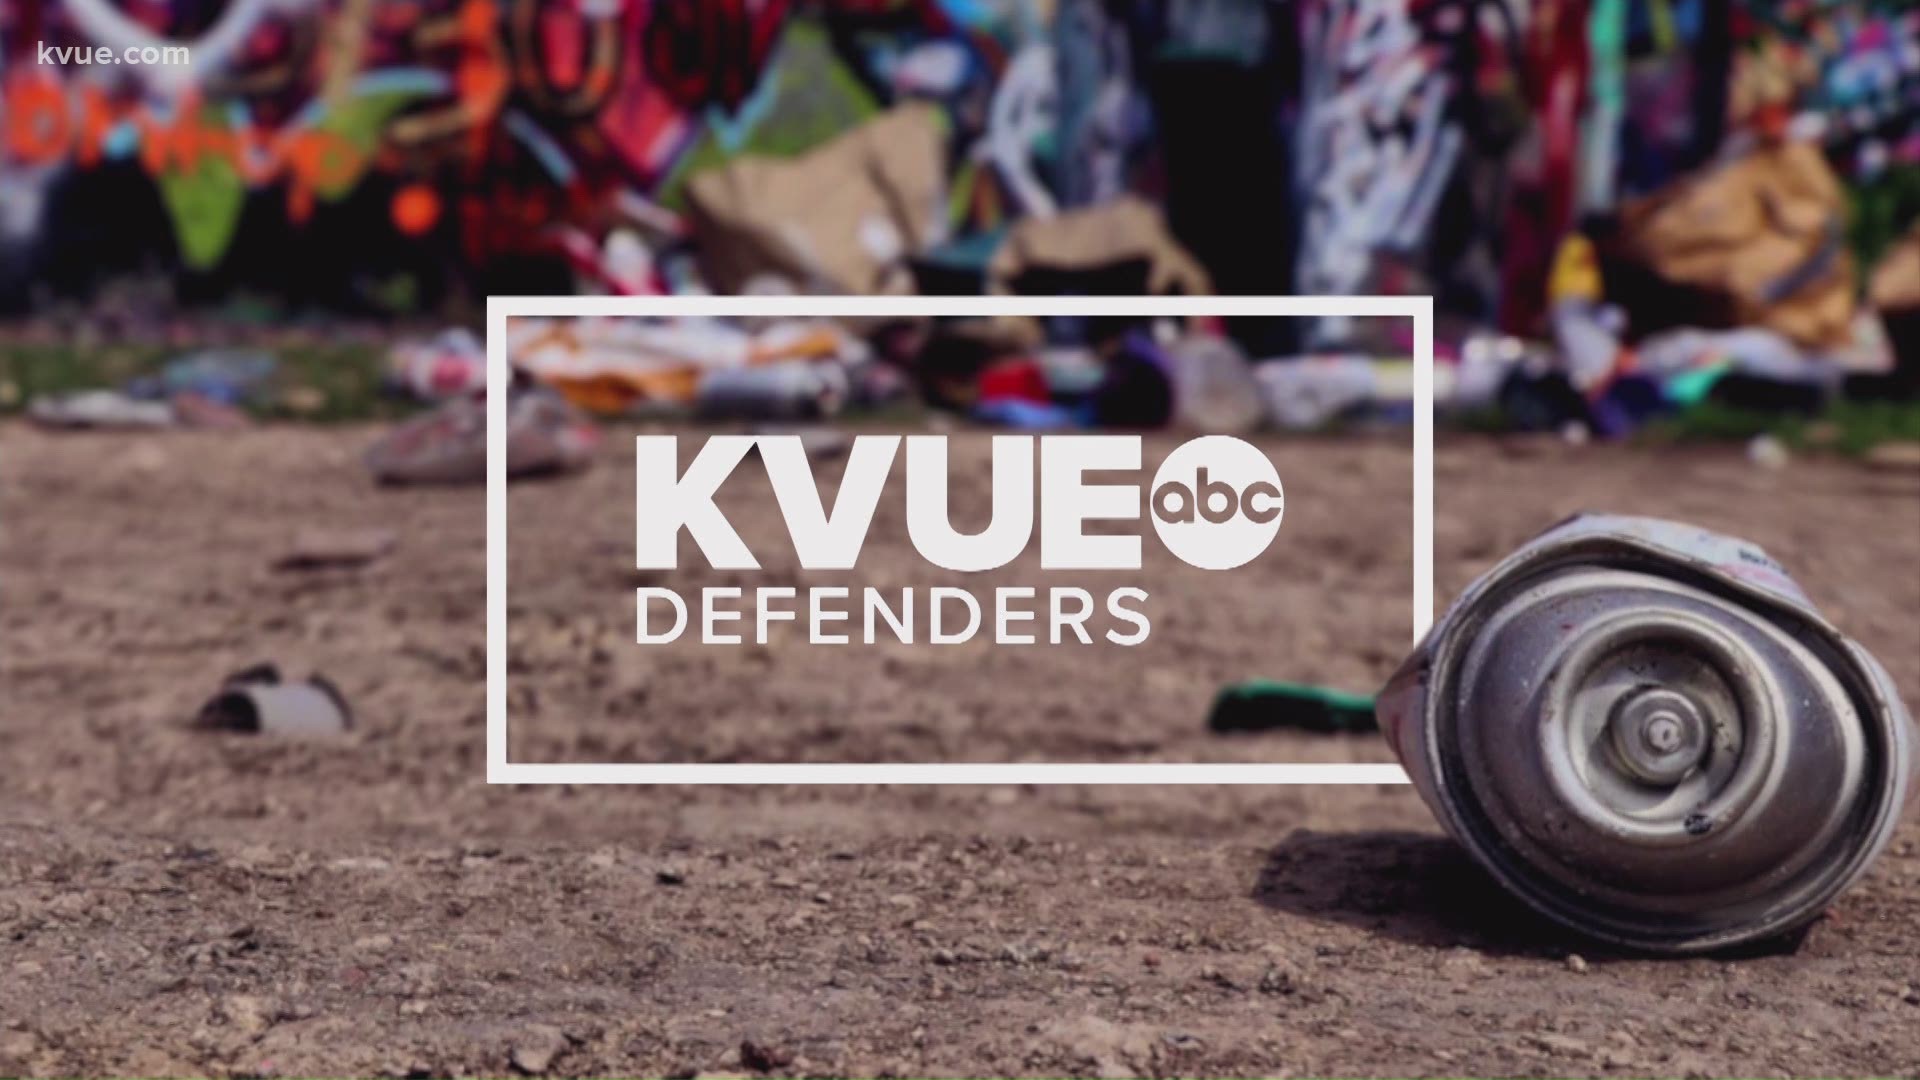 The KVUE Defenders are continuing to answer your election questions. If you have a question you'd like KVUE to answer, text 512-459-9442.